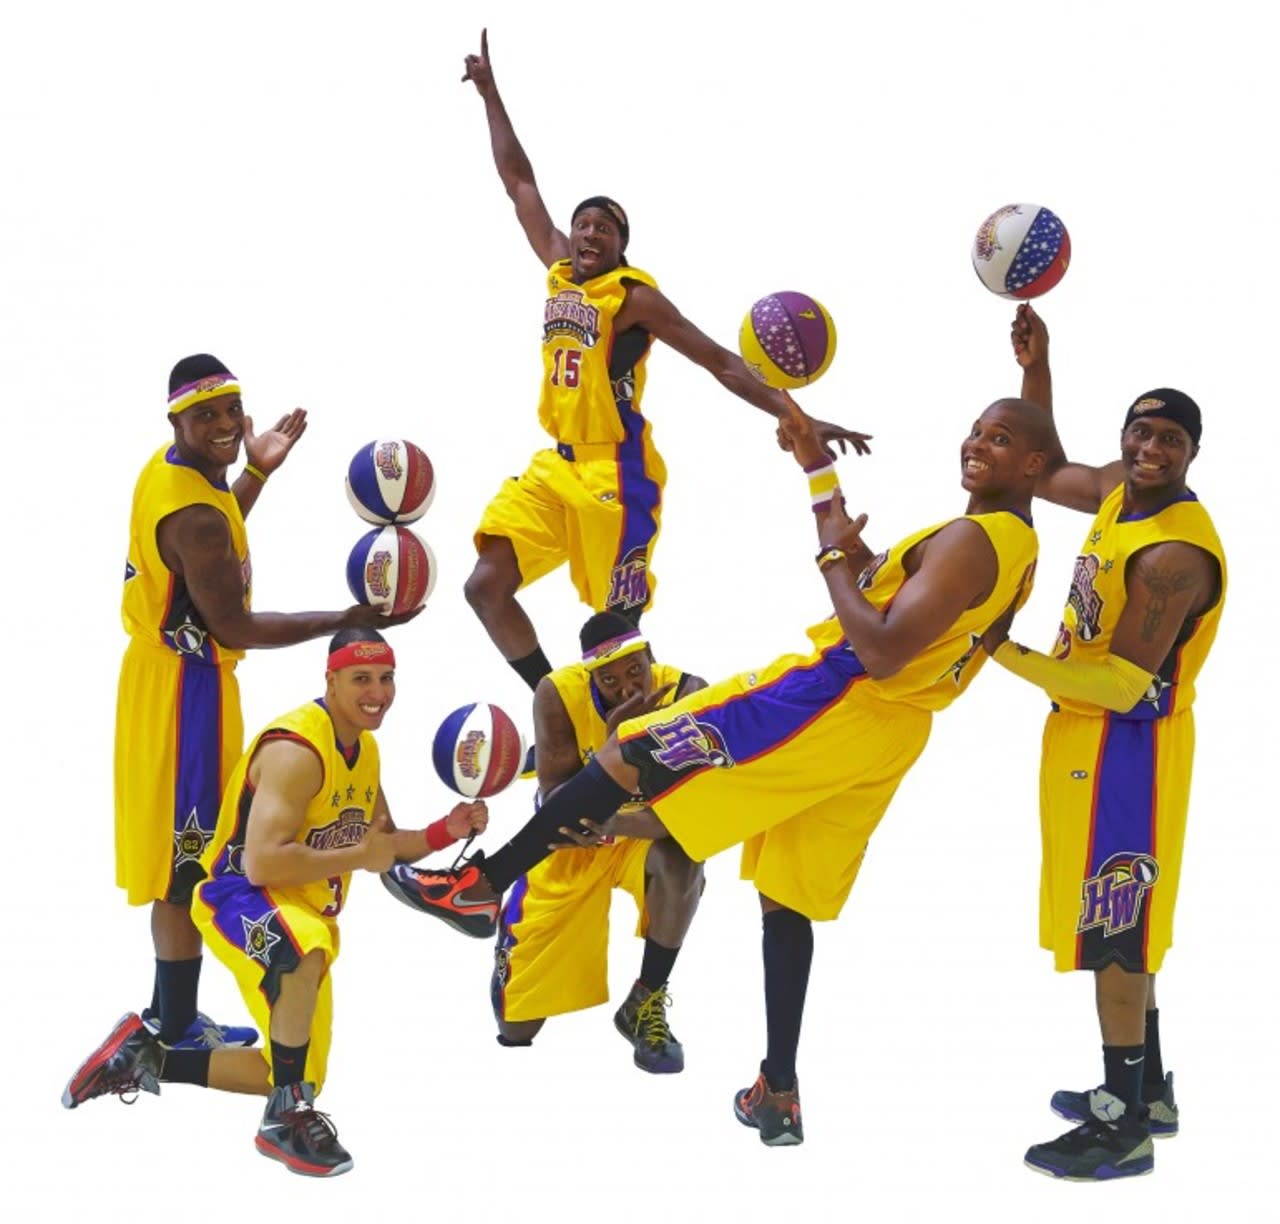 Tickets are now available to see the Harlem Wizards in Dumont. 